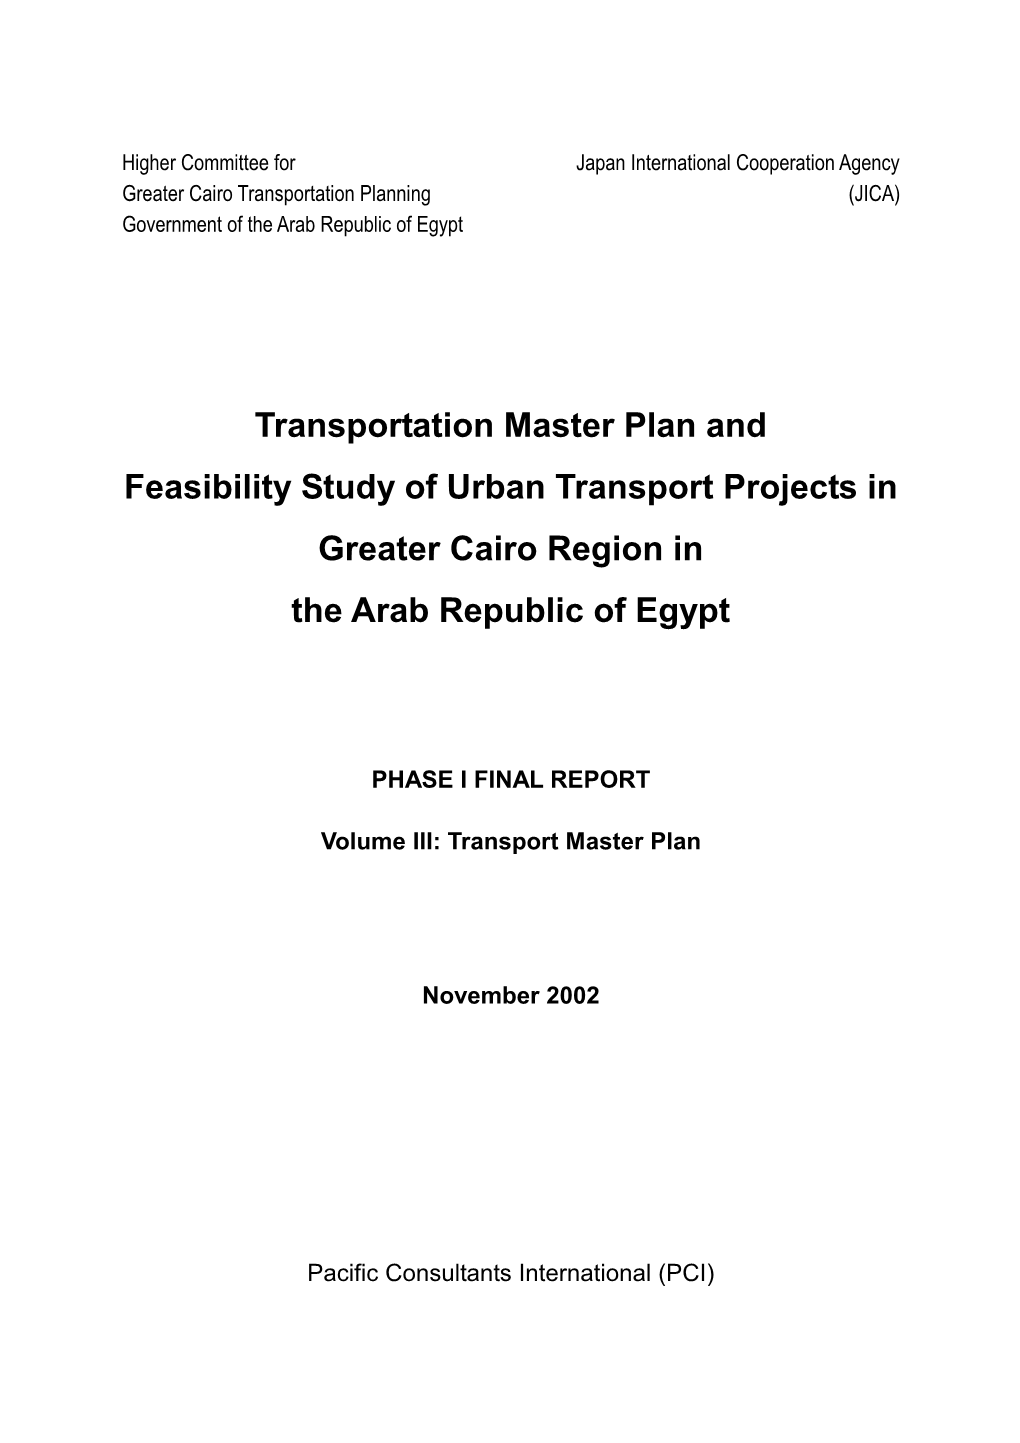 Transportation Master Plan and Feasibility Study of Urban Transport Projects in Greater Cairo Region in the Arab Republic of Egypt